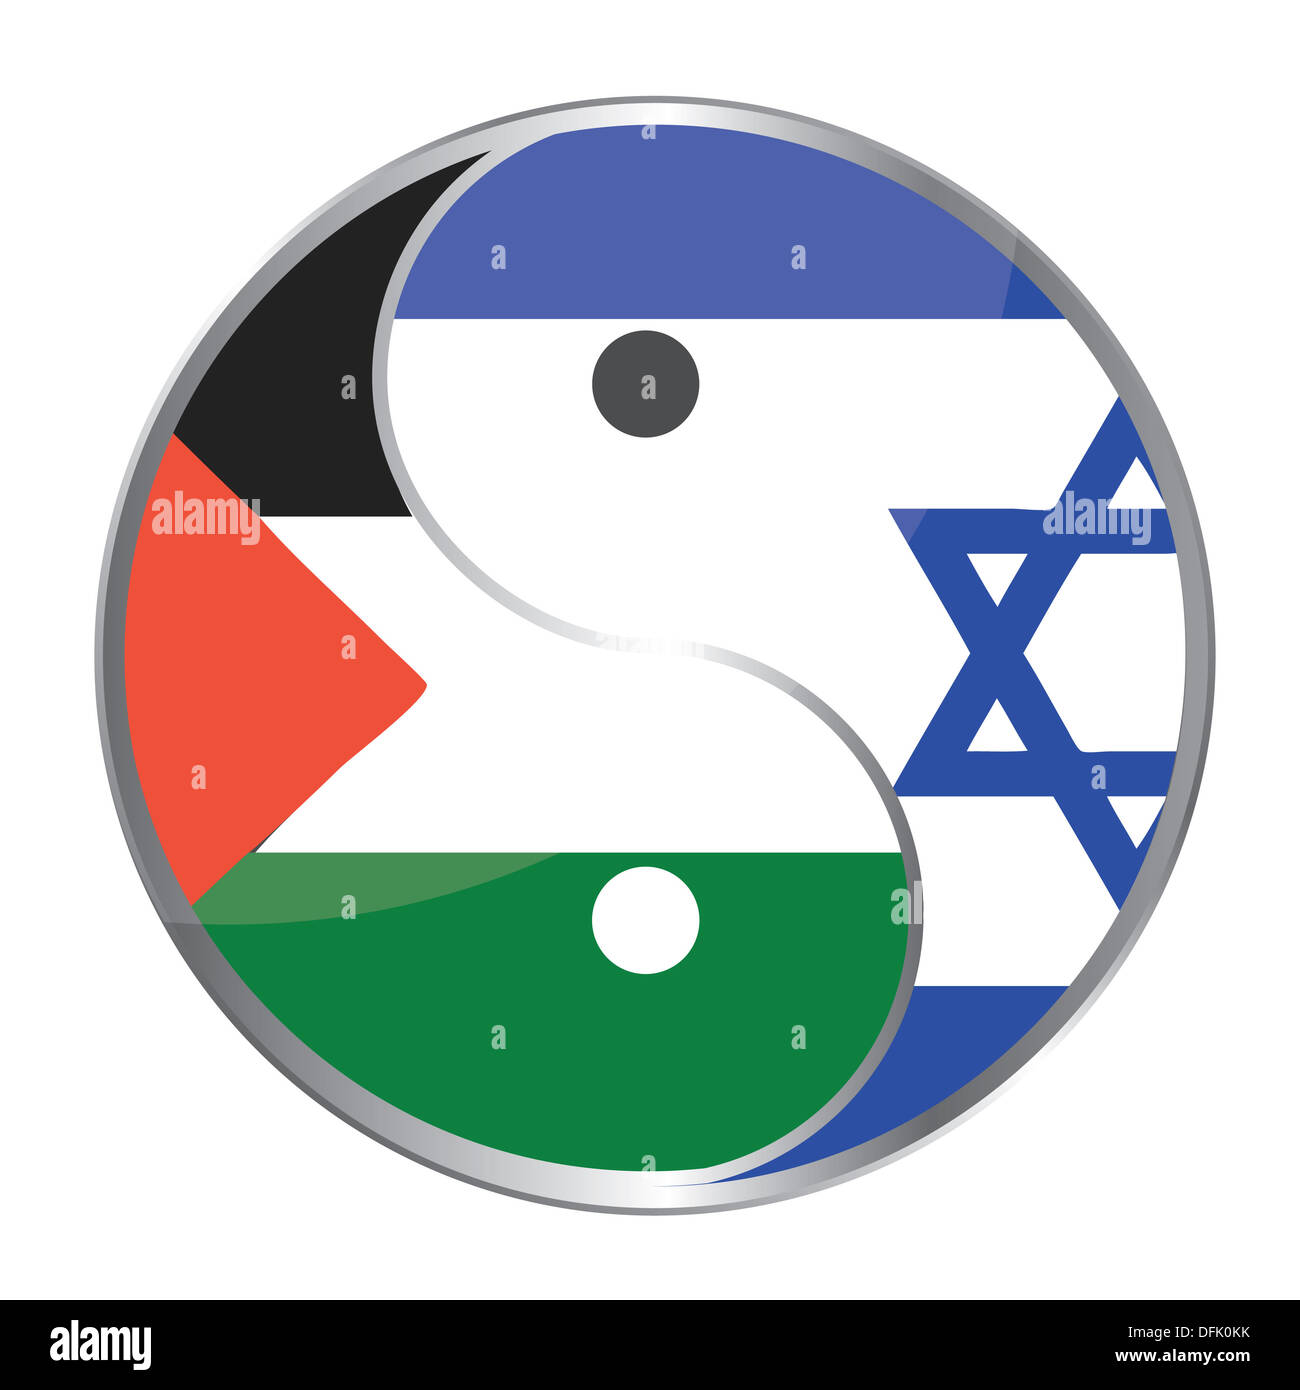 Ying yan symbol with the Israeli and Palestinian flags. Stock Photo